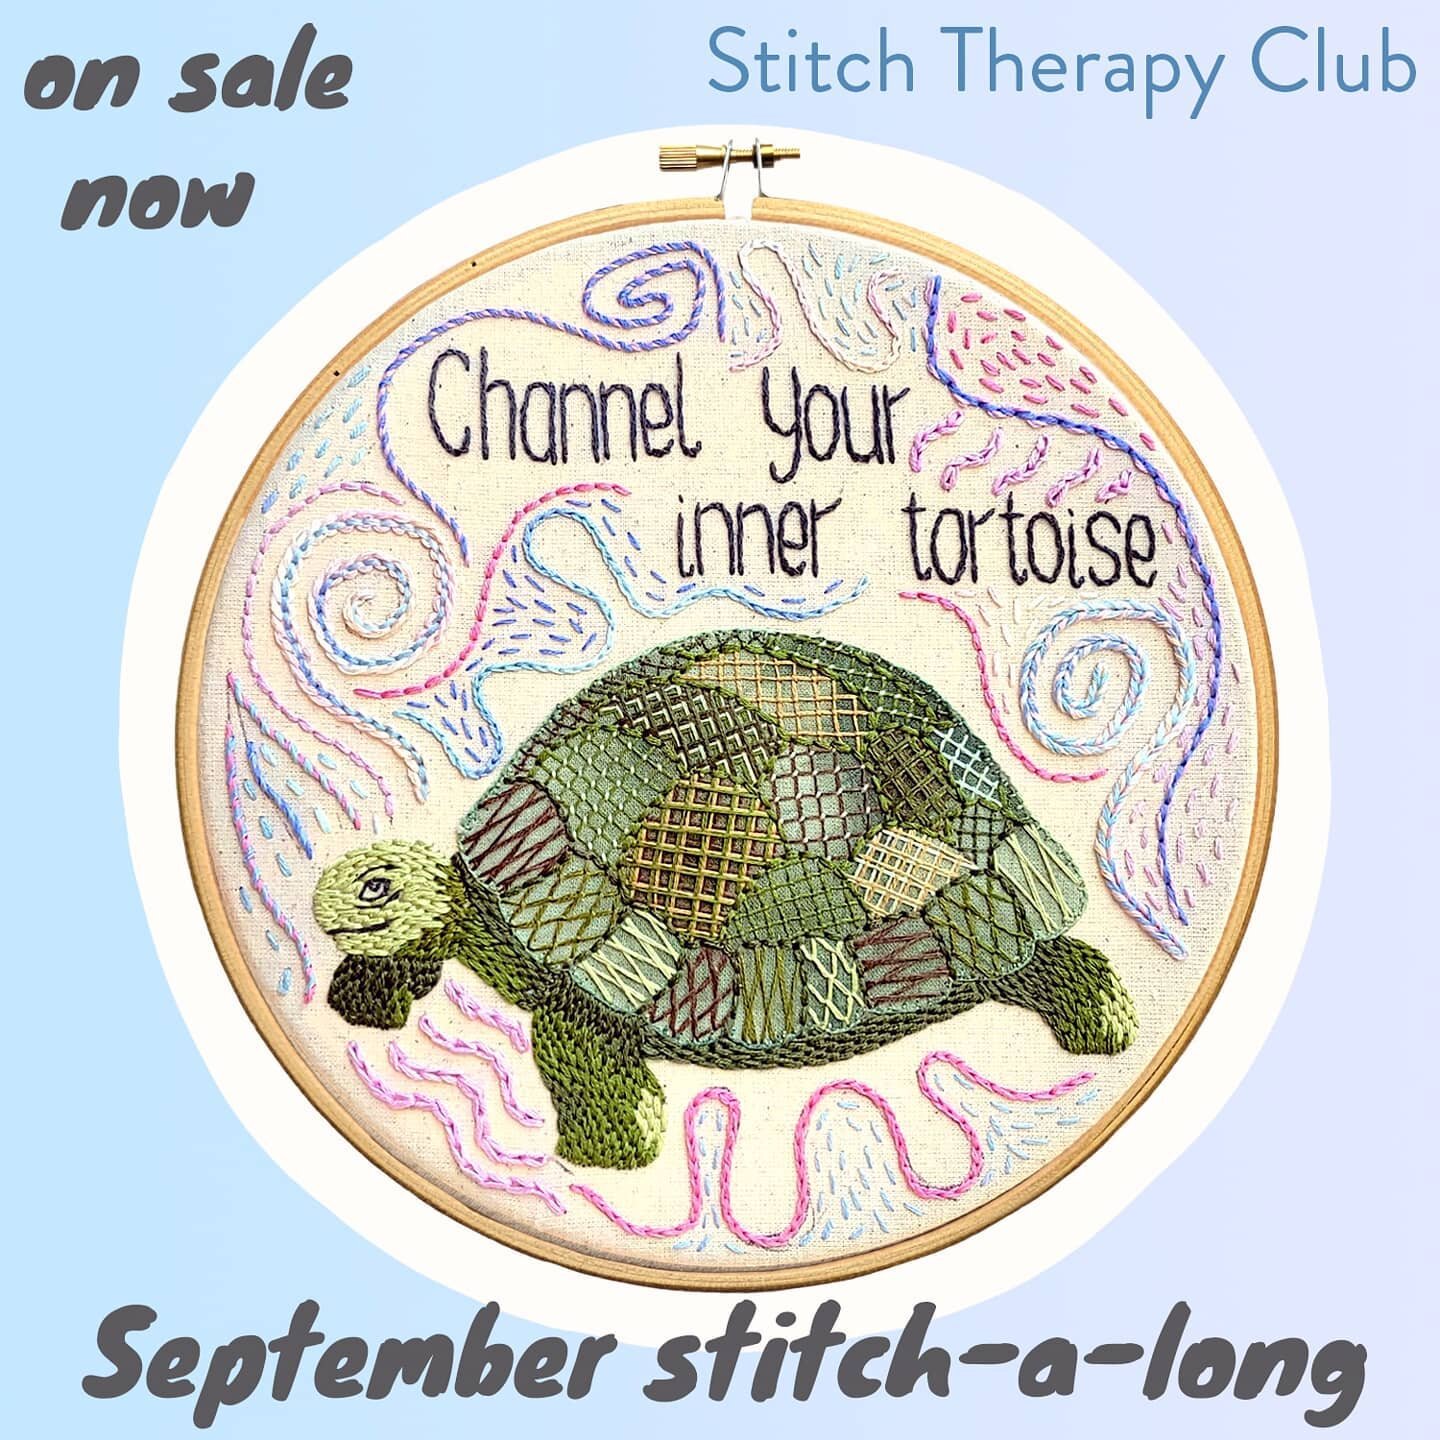 The Stitch Therapy Club stitch-a-long is BACK after taking a break for August, and i'm super excited to share with you September's stitch-a-long! 'Channel your inner tortoise' is a phrase i'm often saying to STC stitchers, as I want embroidery for yo